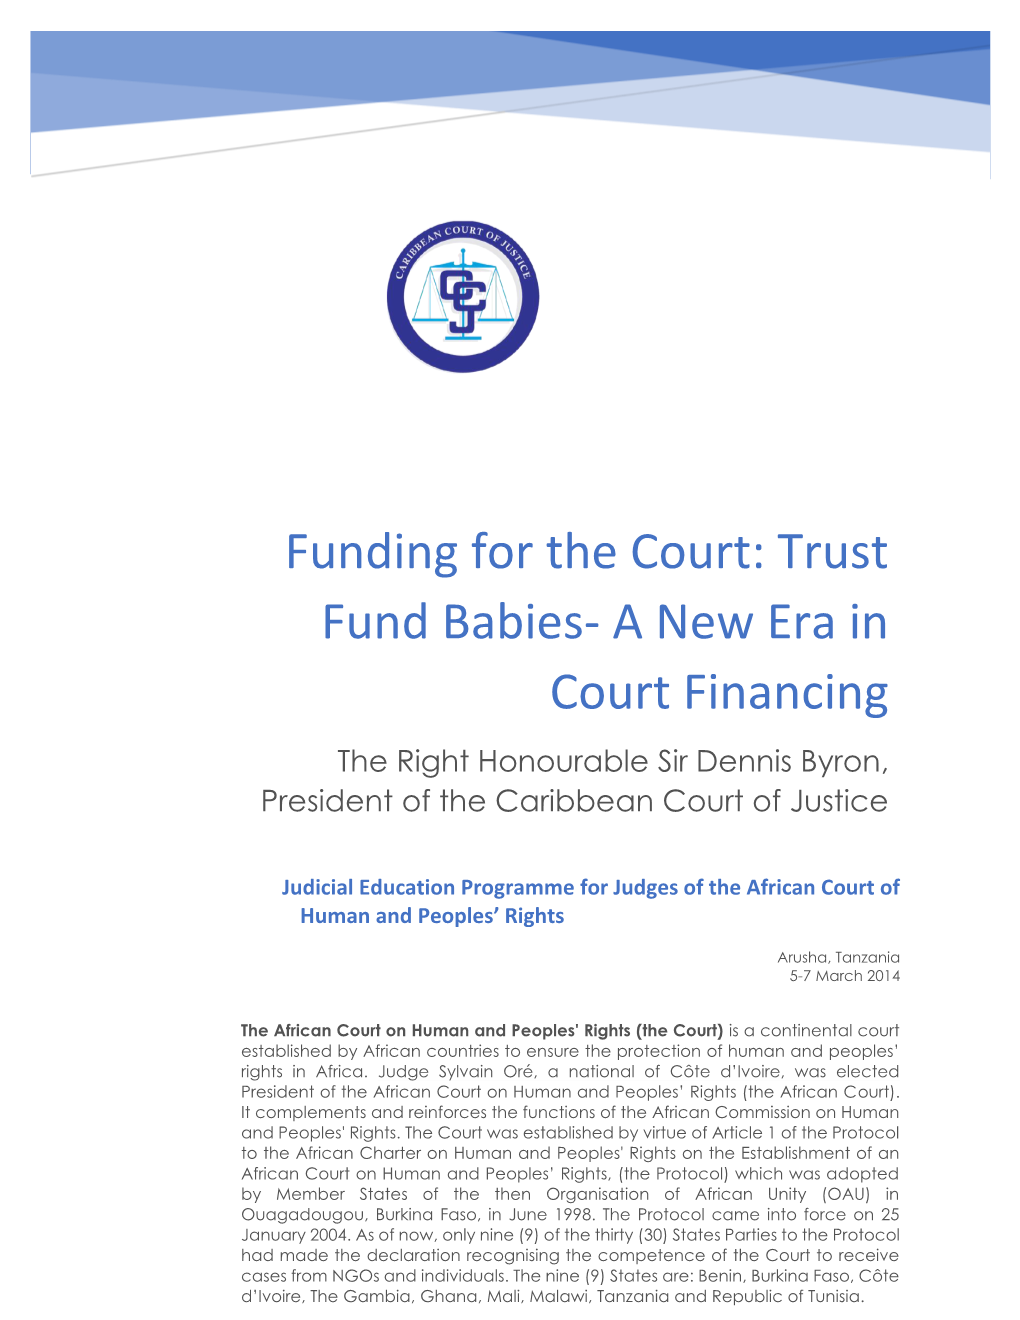 Funding for the Court by Sir Dennis Byron